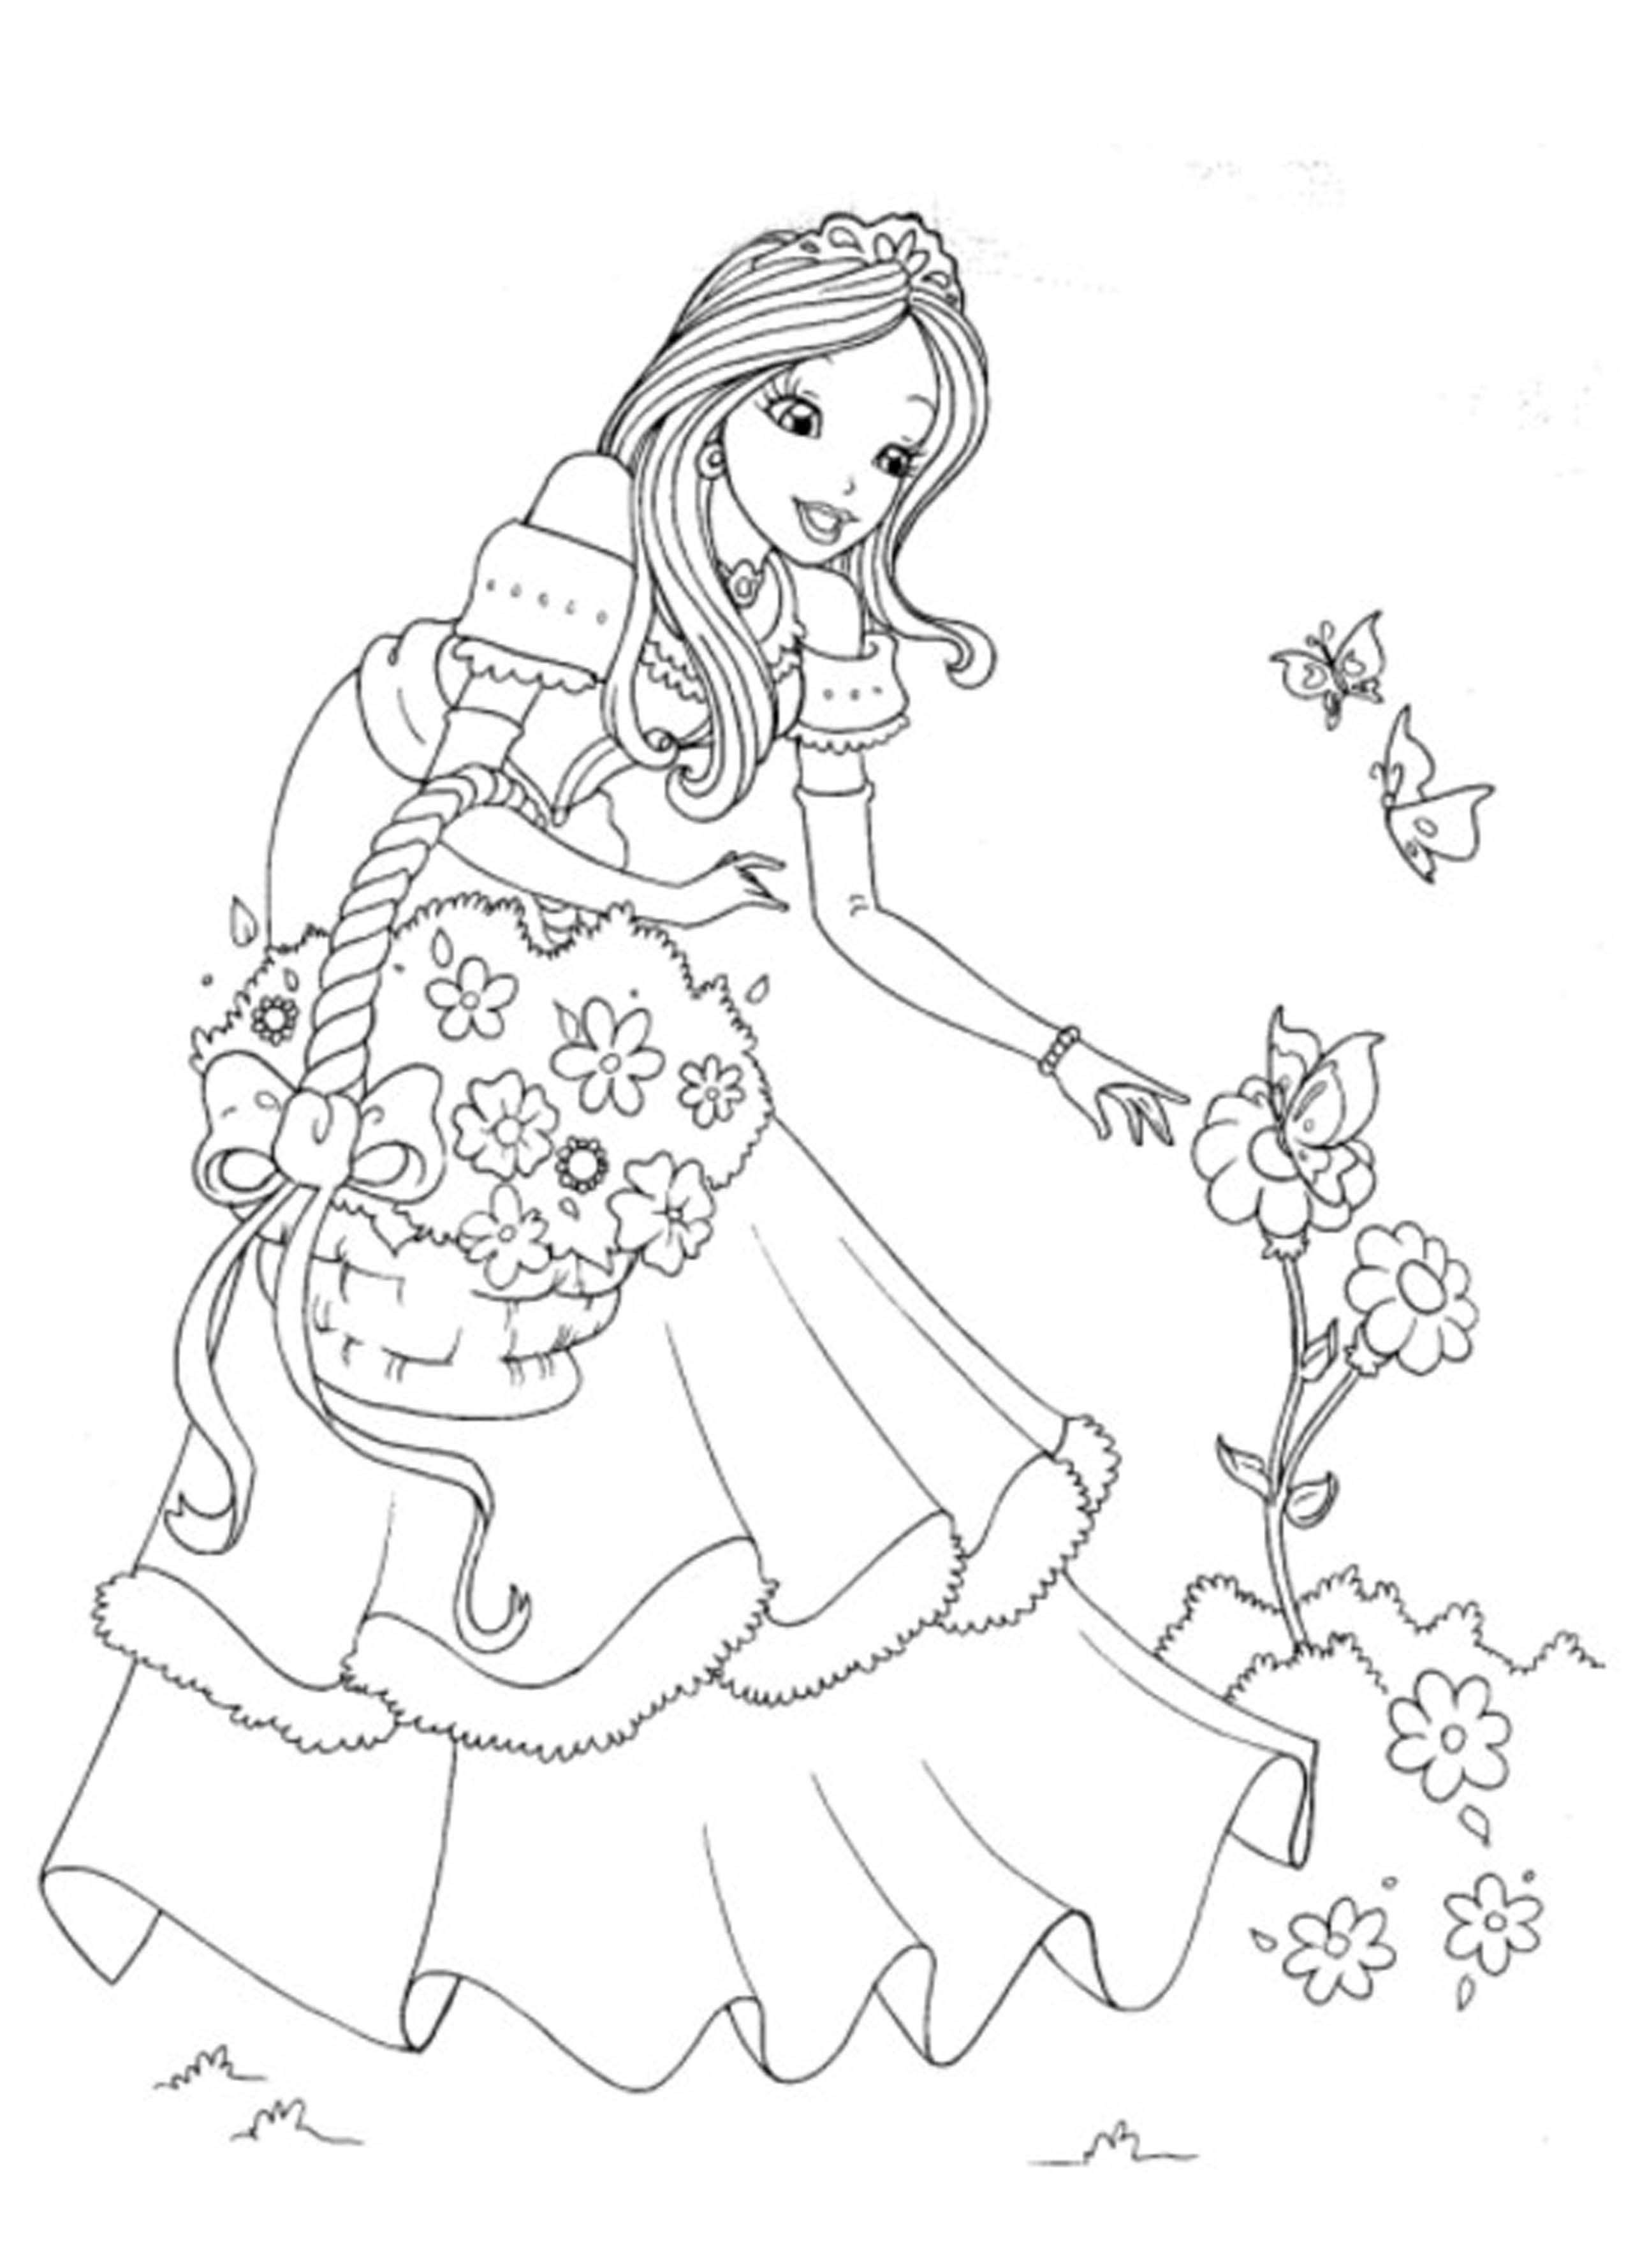 Disney Princess Coloring Pages Jasmine Free Coloring Sheets 28 Collection Non Disney Princess Coloring Pages